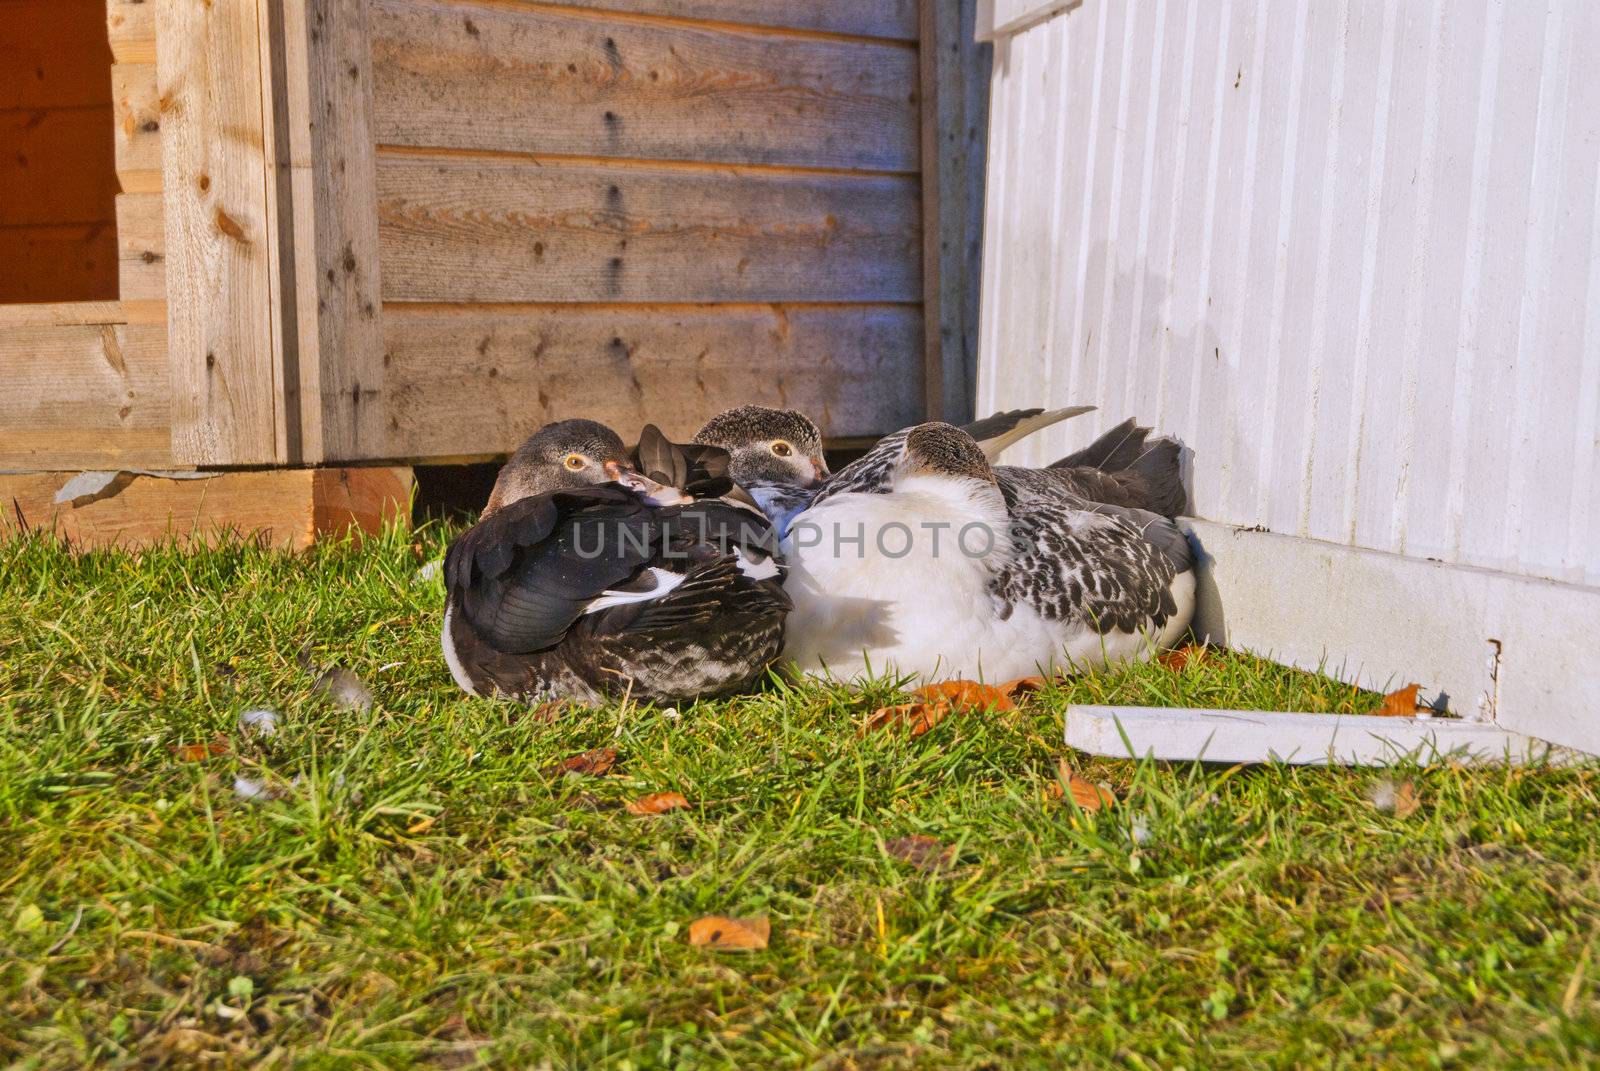 by the duck pond at fredriksten fortress in halden  has it been set out a family of six with muscovy duck, one drake, one hen and four ducklings, the muscovy duck is a large duck native to mexico, central, and south america, image is shot in november 2012 and shows three of the ducklings.